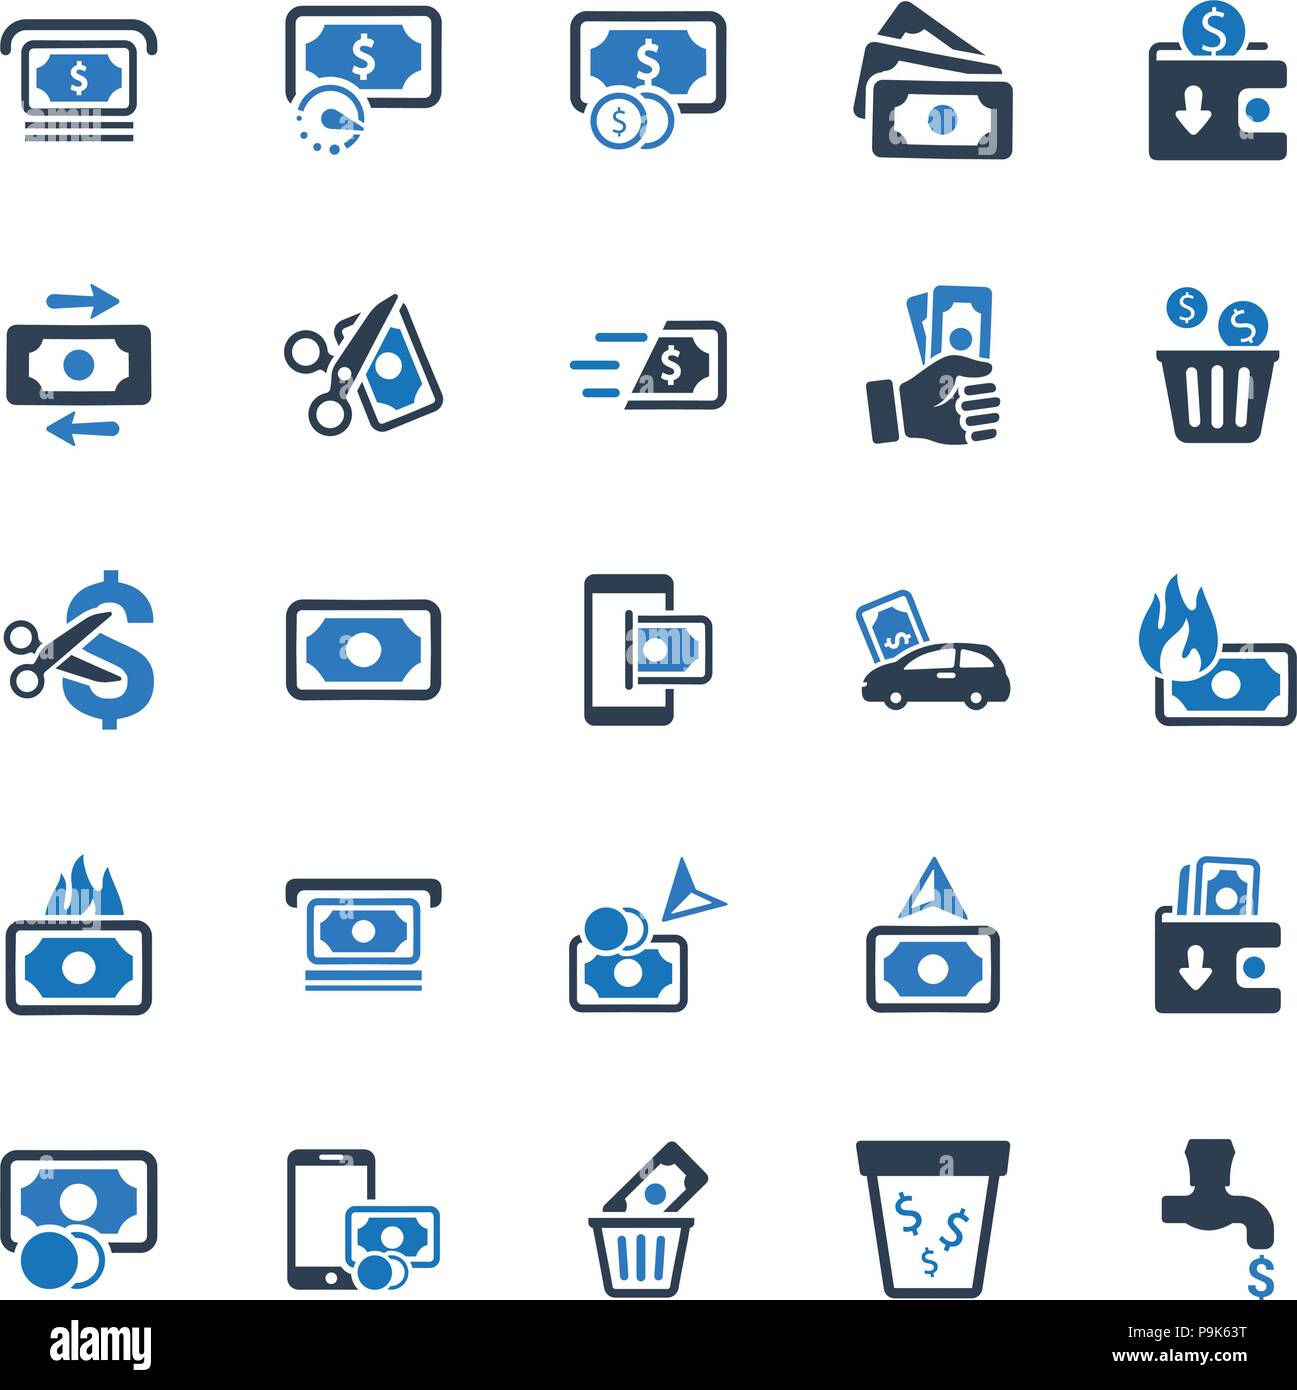 Beautiful, Meticulously Designed Money Icons - Blue Version Stock Vector